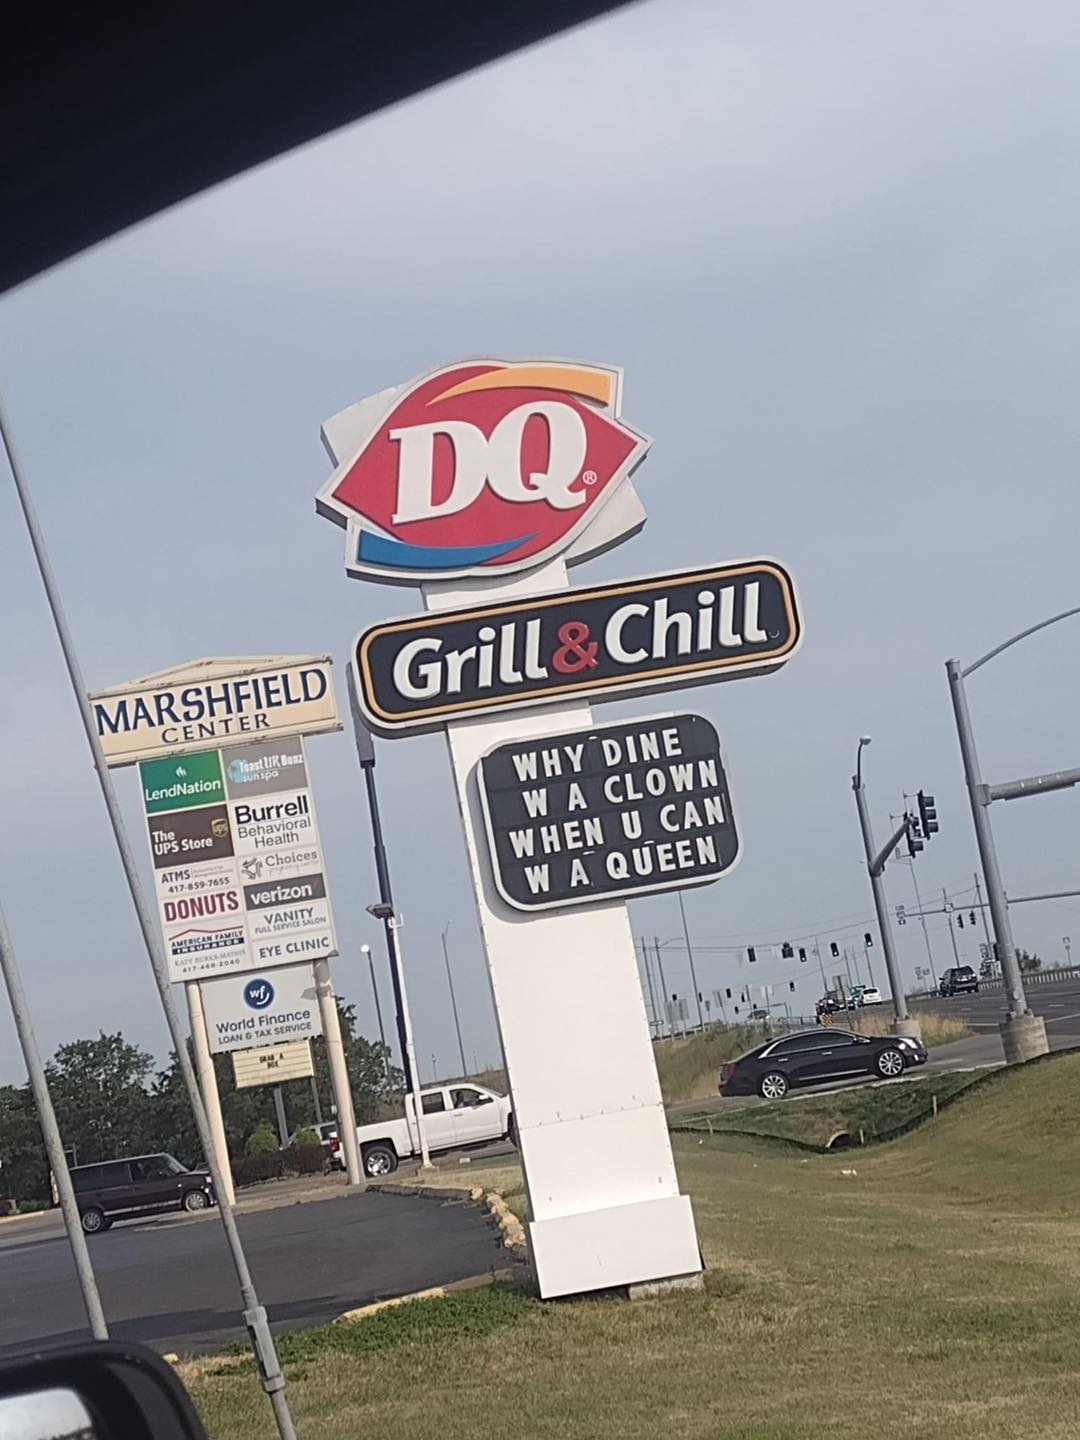 Dq's sign that says "why dine w a clown when u can w a queen."